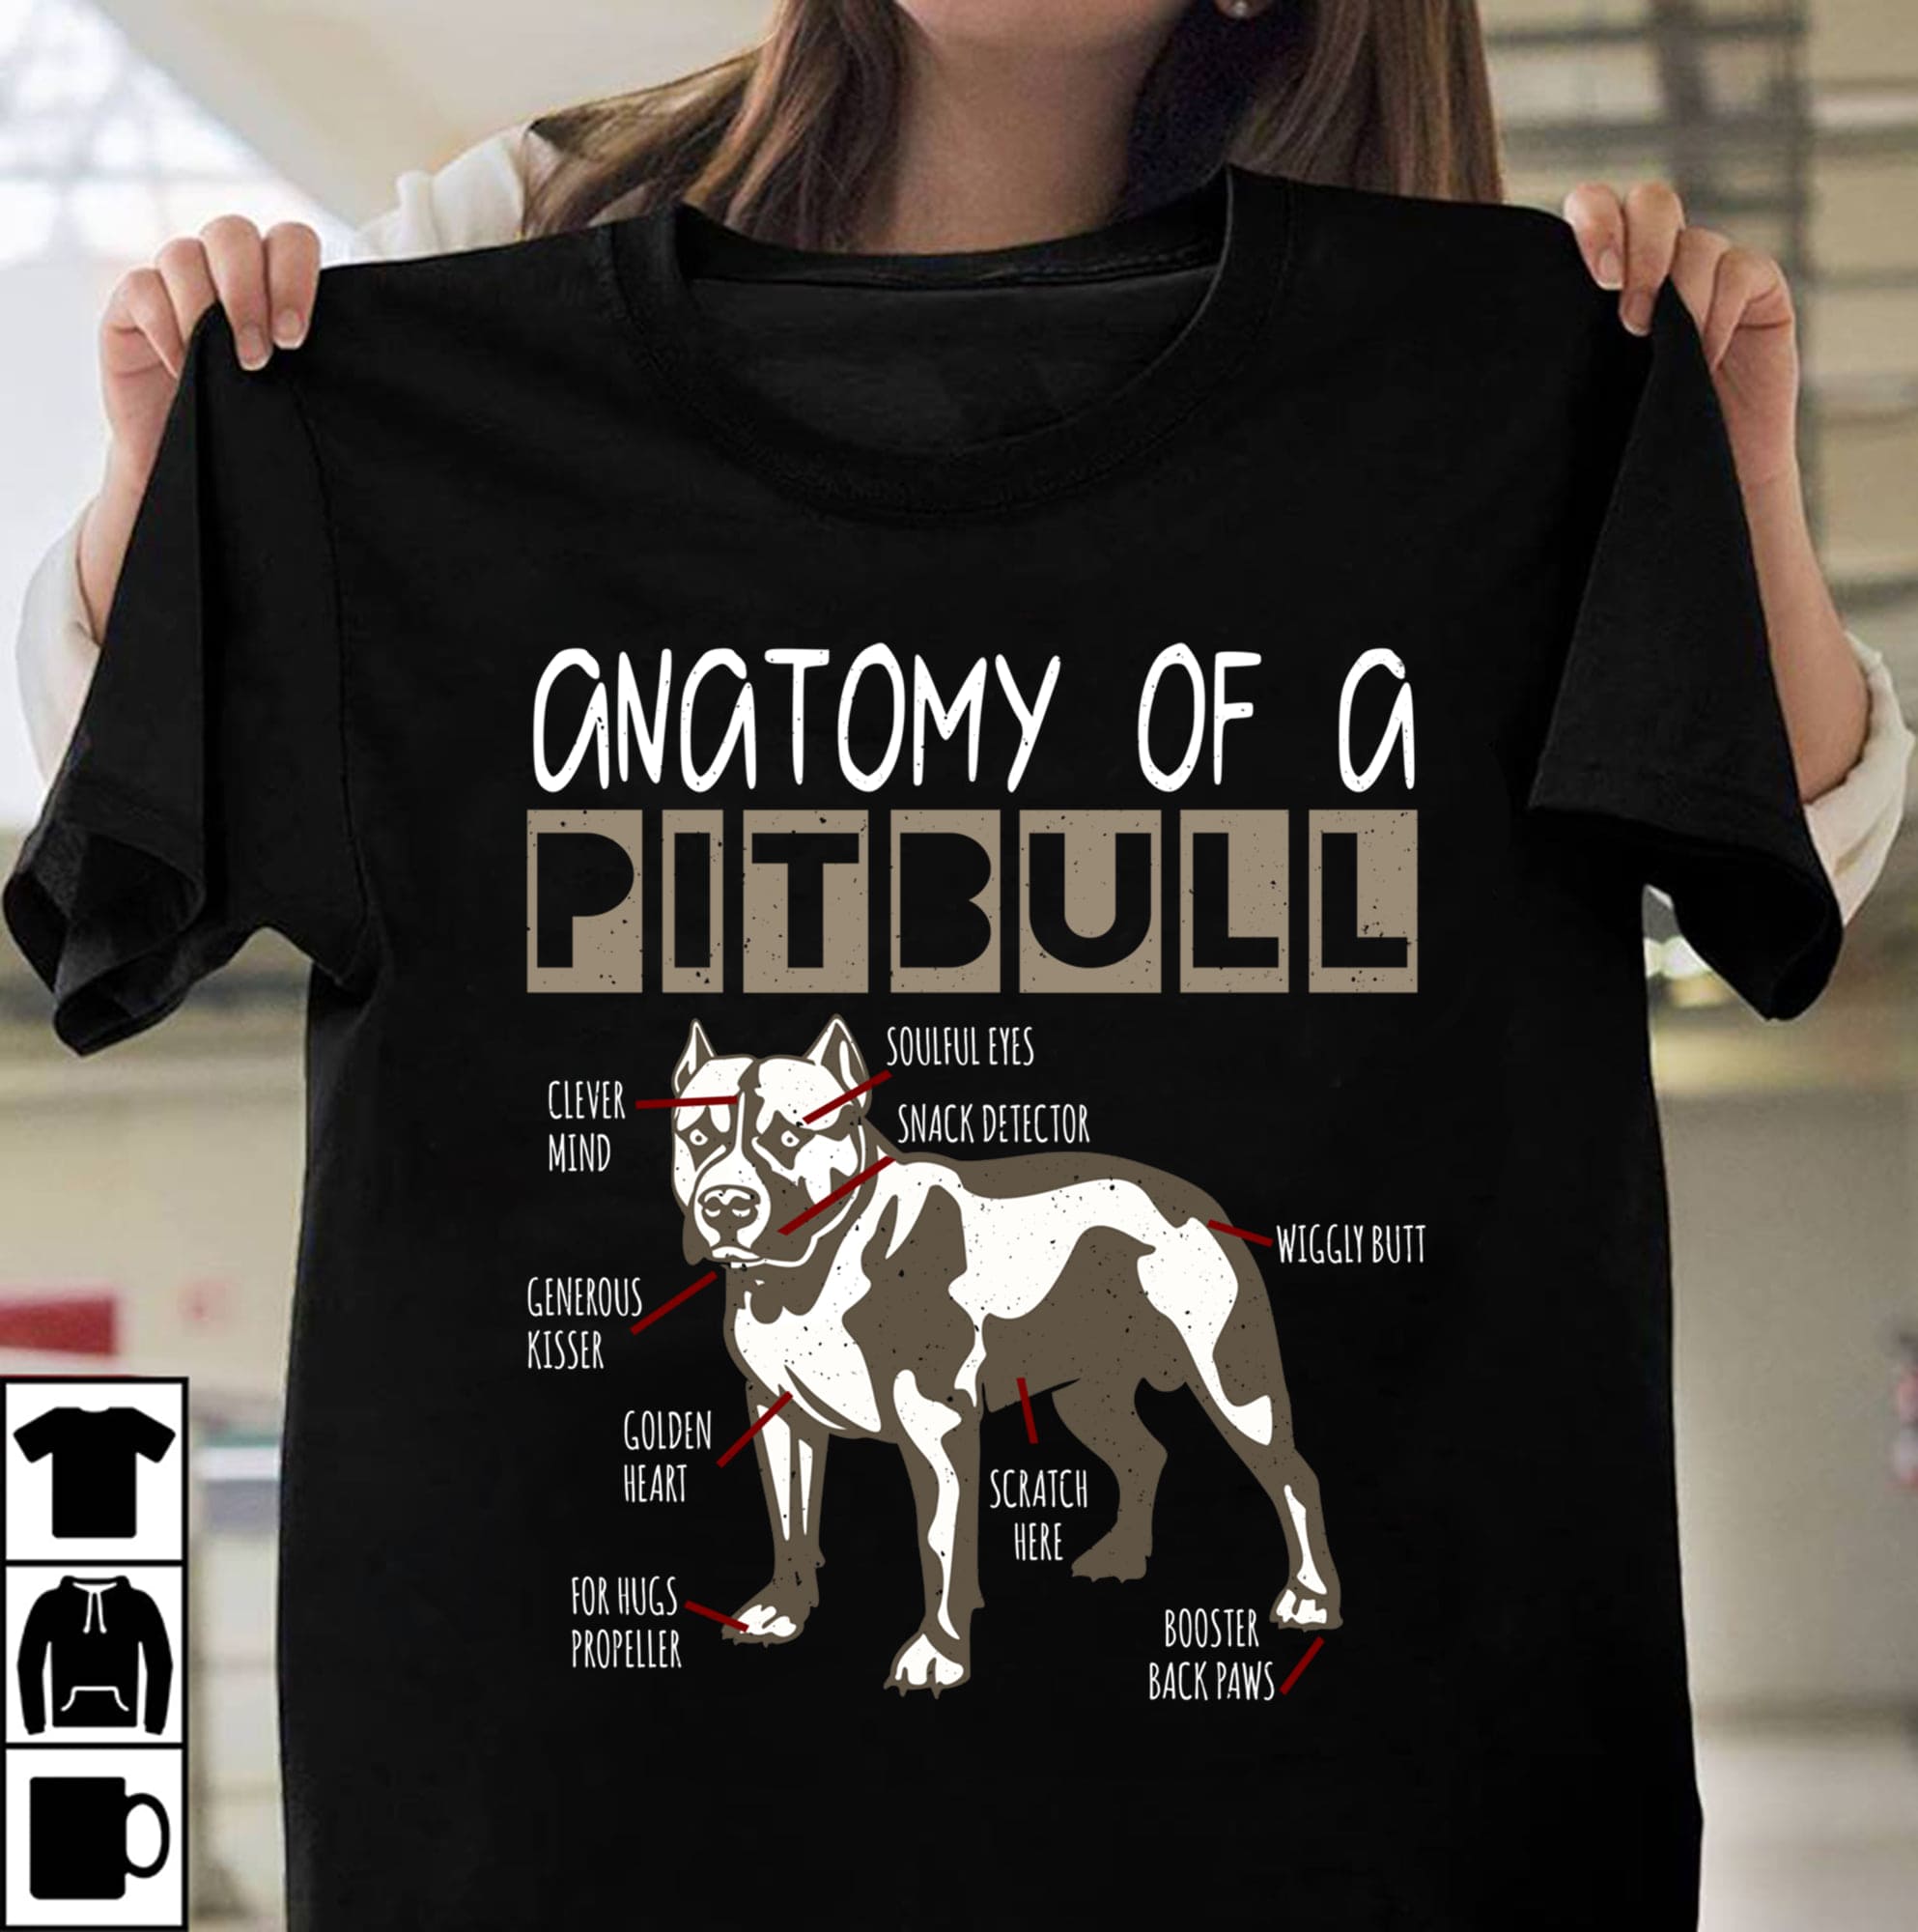 Pitbull Graphic T-shirt - Anatomy of a pitbull clever mind soulful eyes snack detector generous kisser